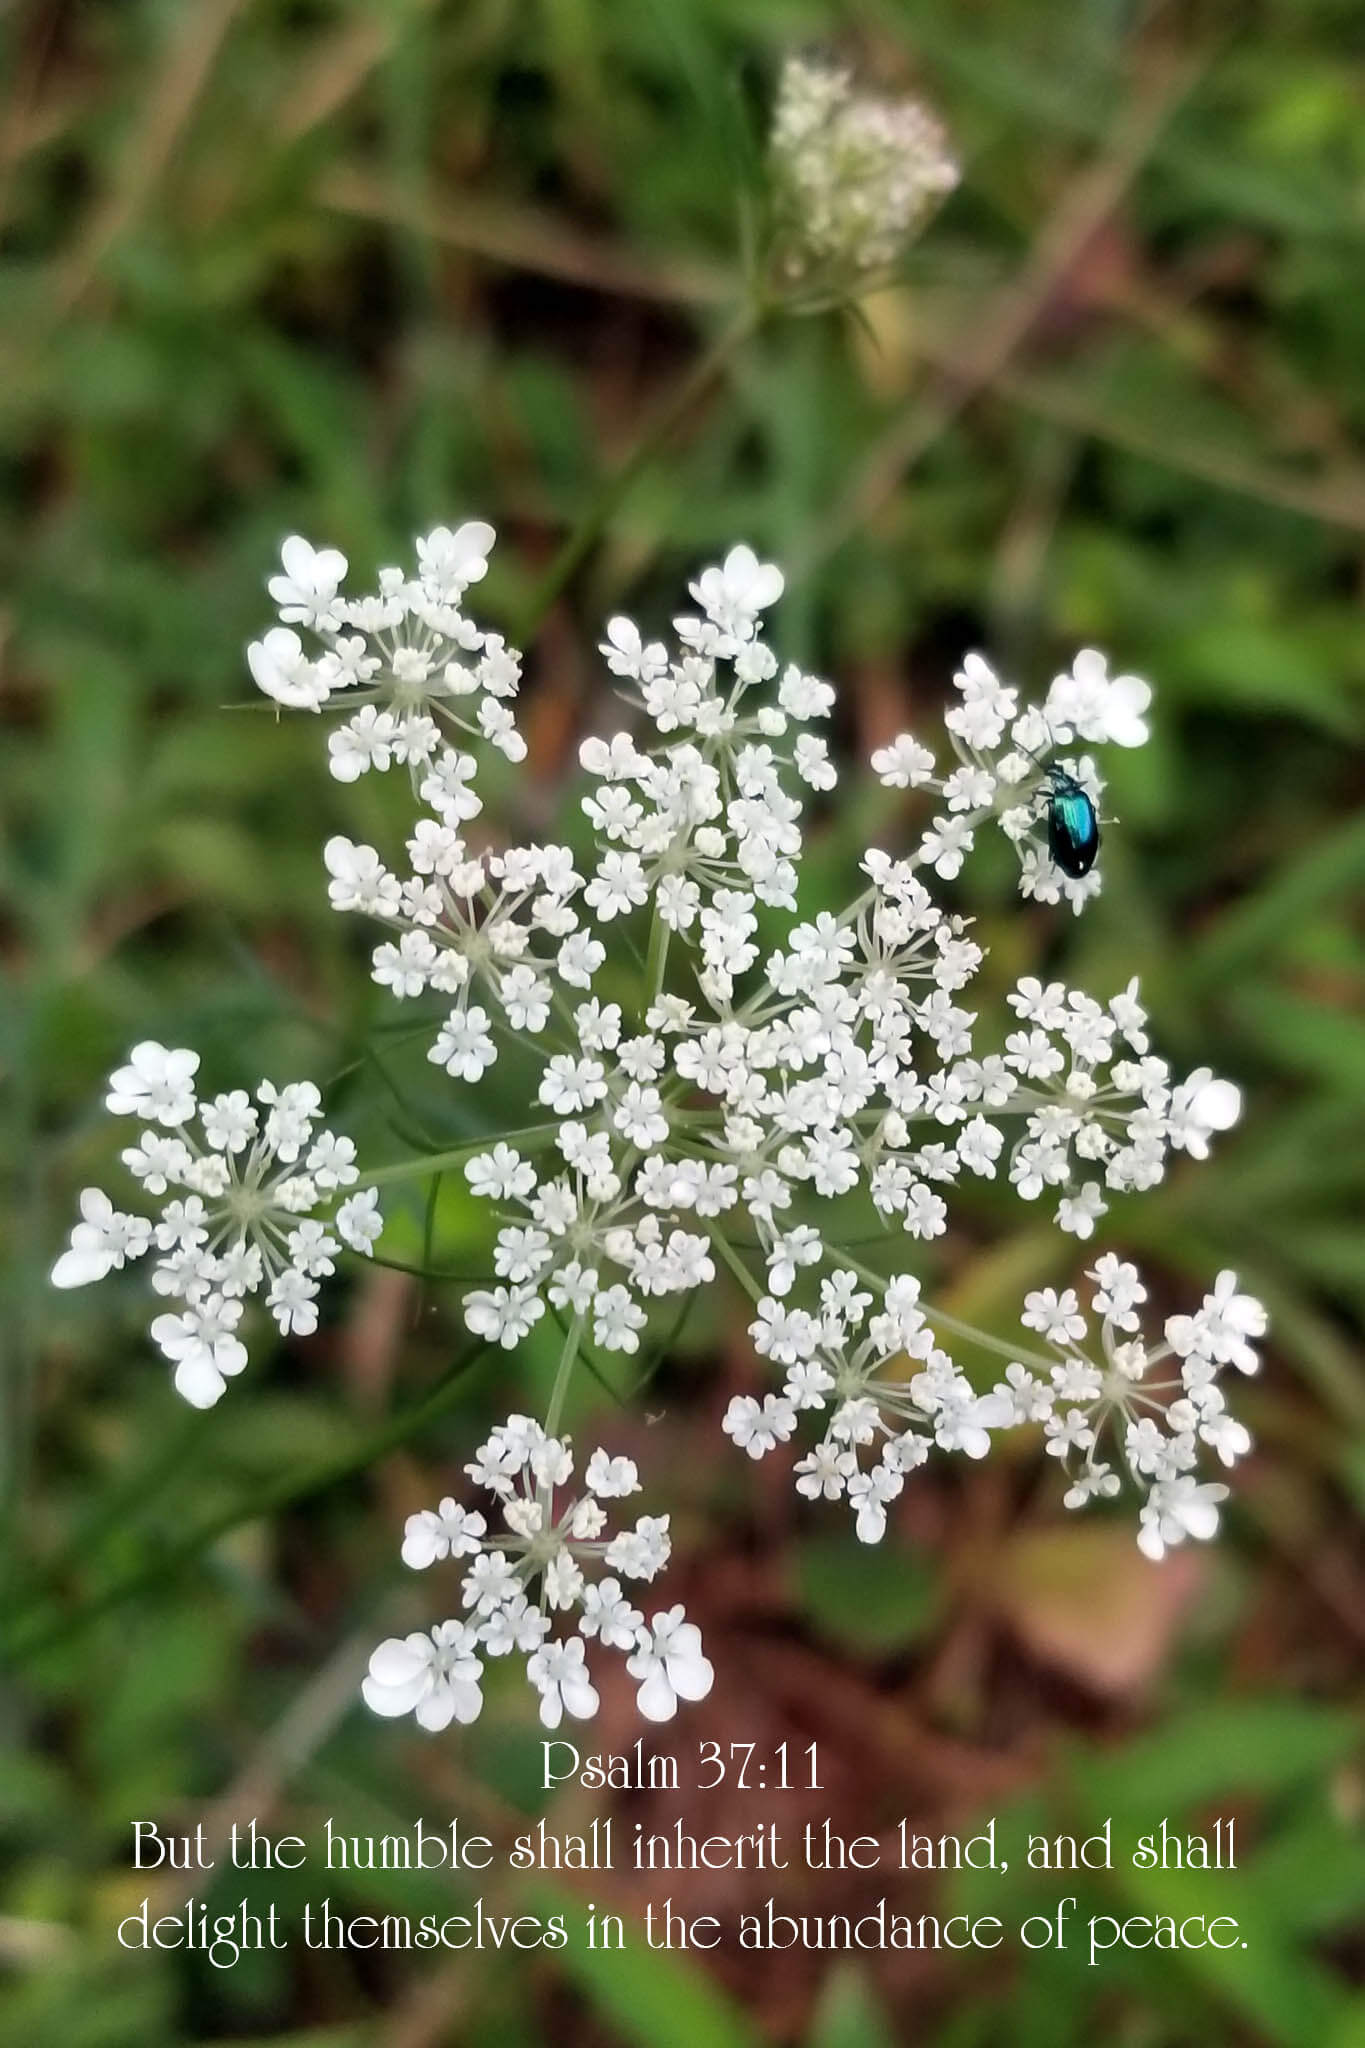 Psalm 37:11 Queen Anne's Lace with Teal Beetle Christian greeting card